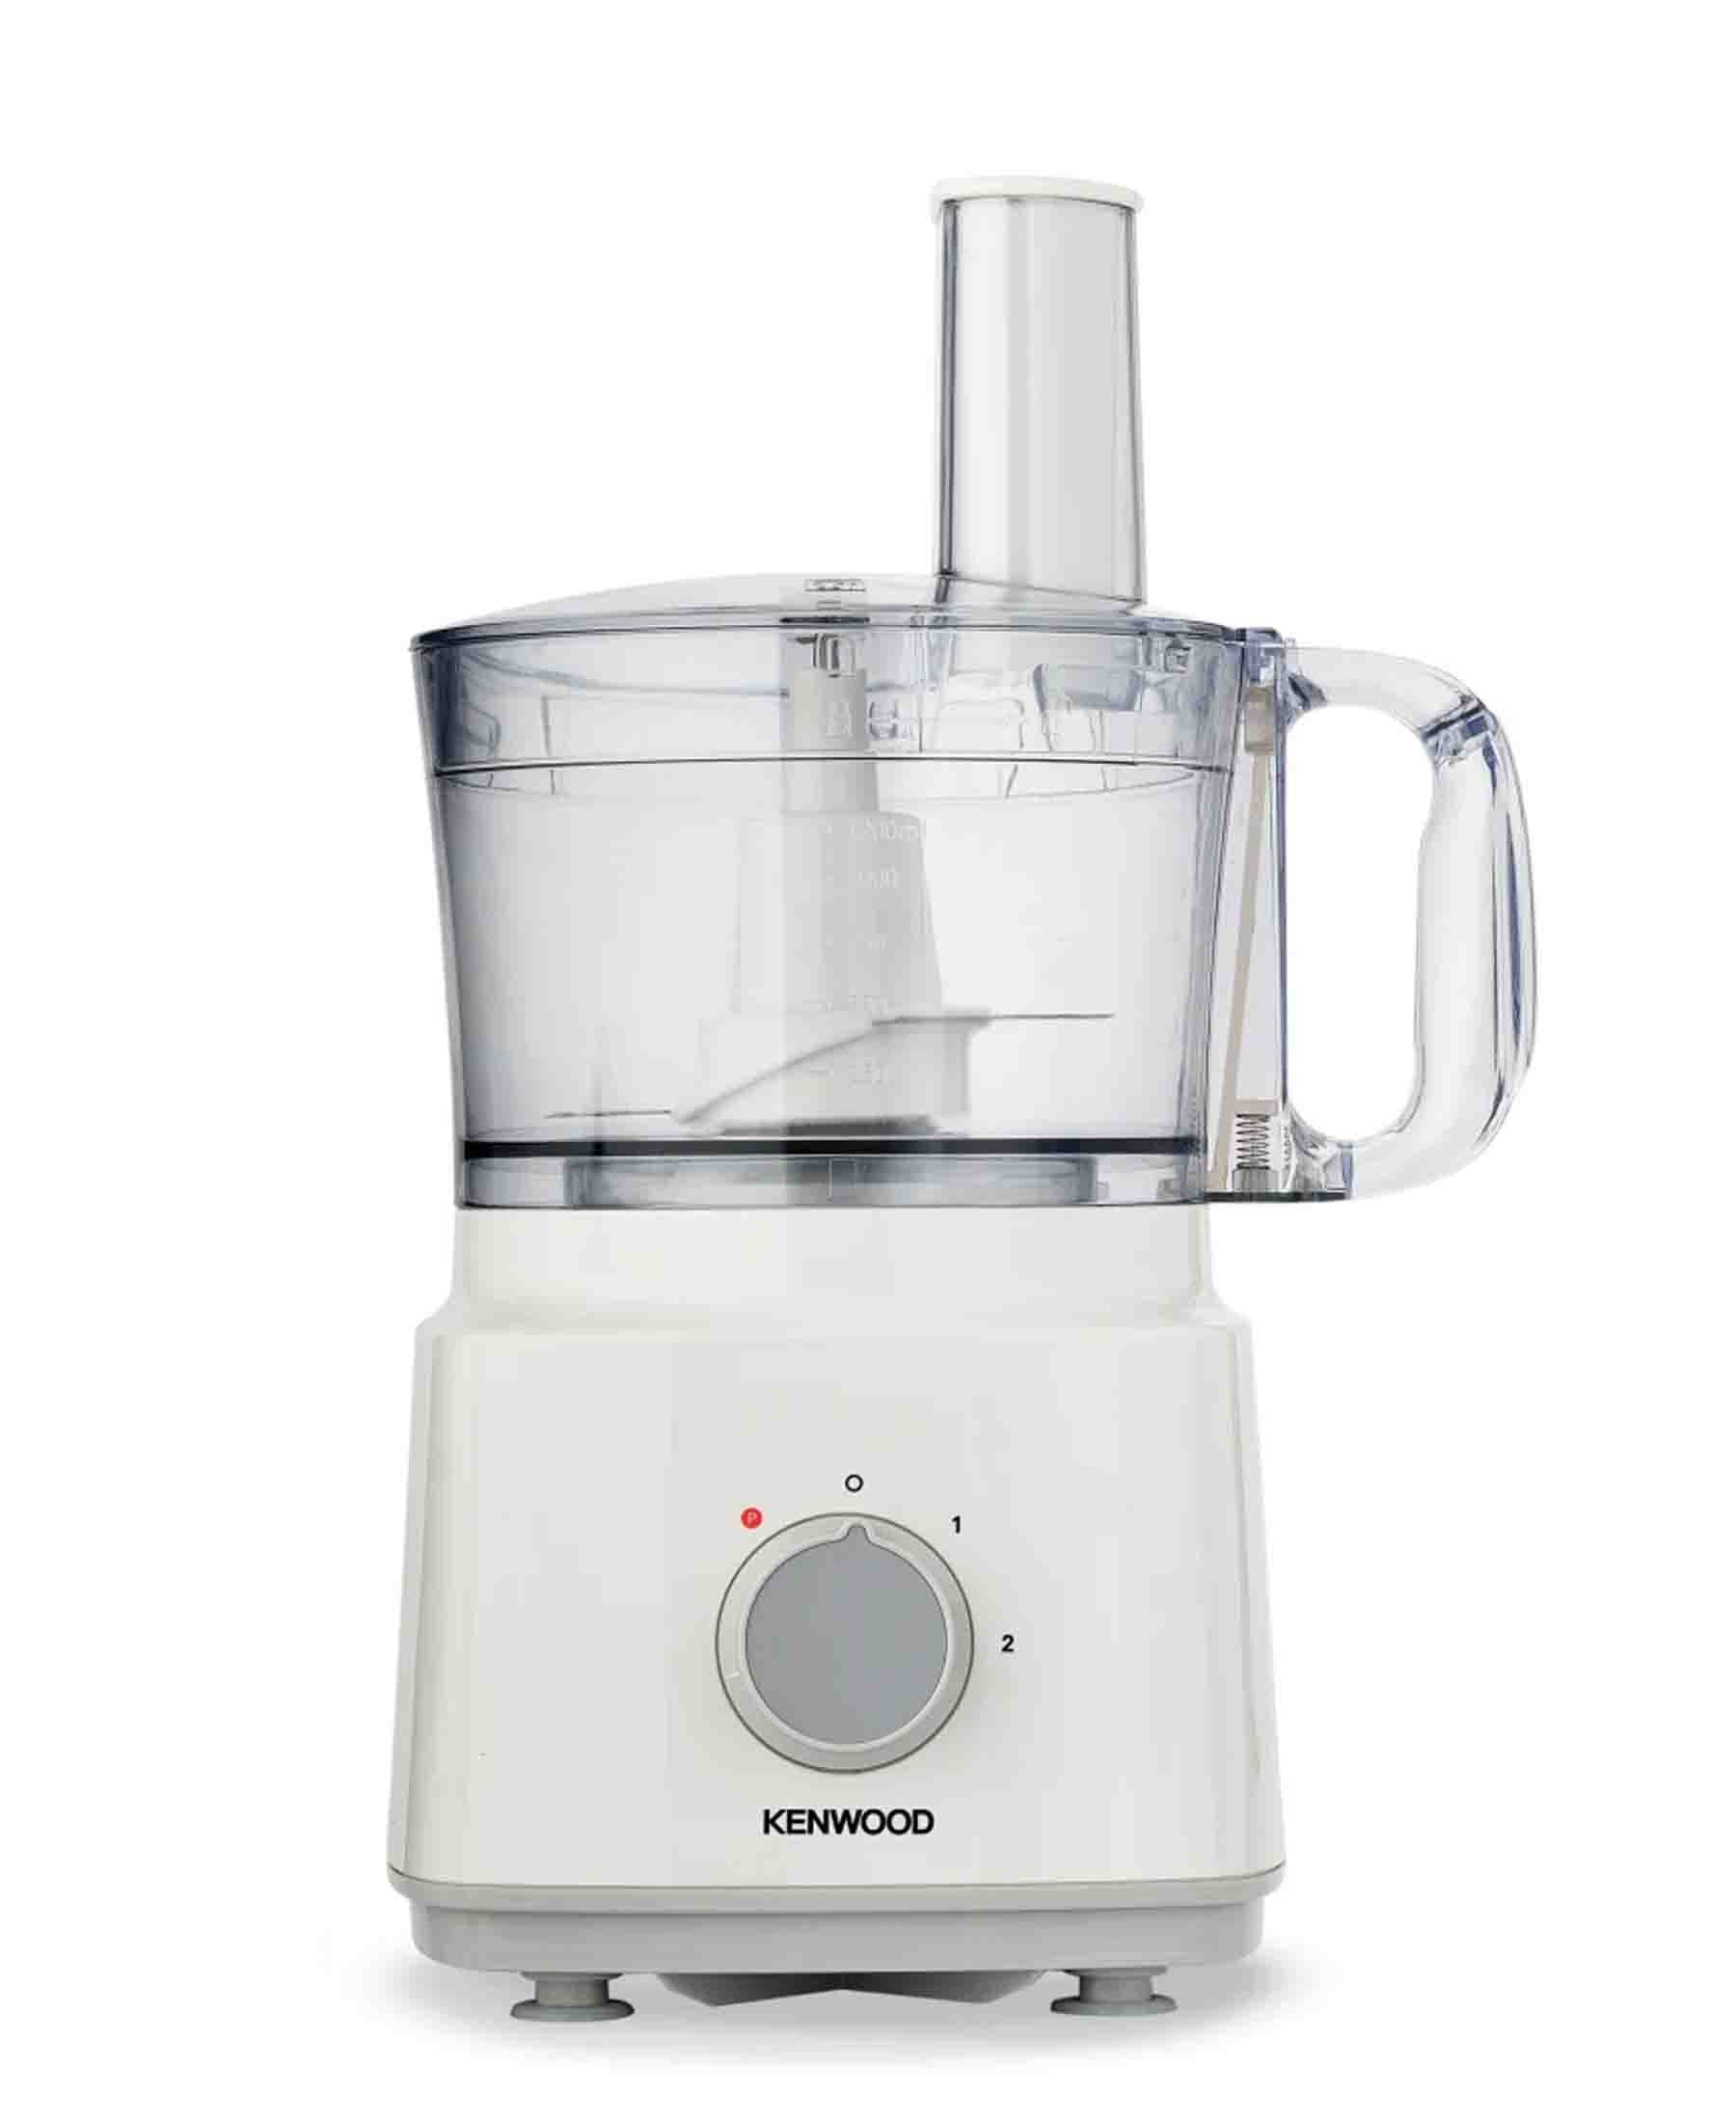 Kenwood Food Processor With Blender 2.1L Attachment - White